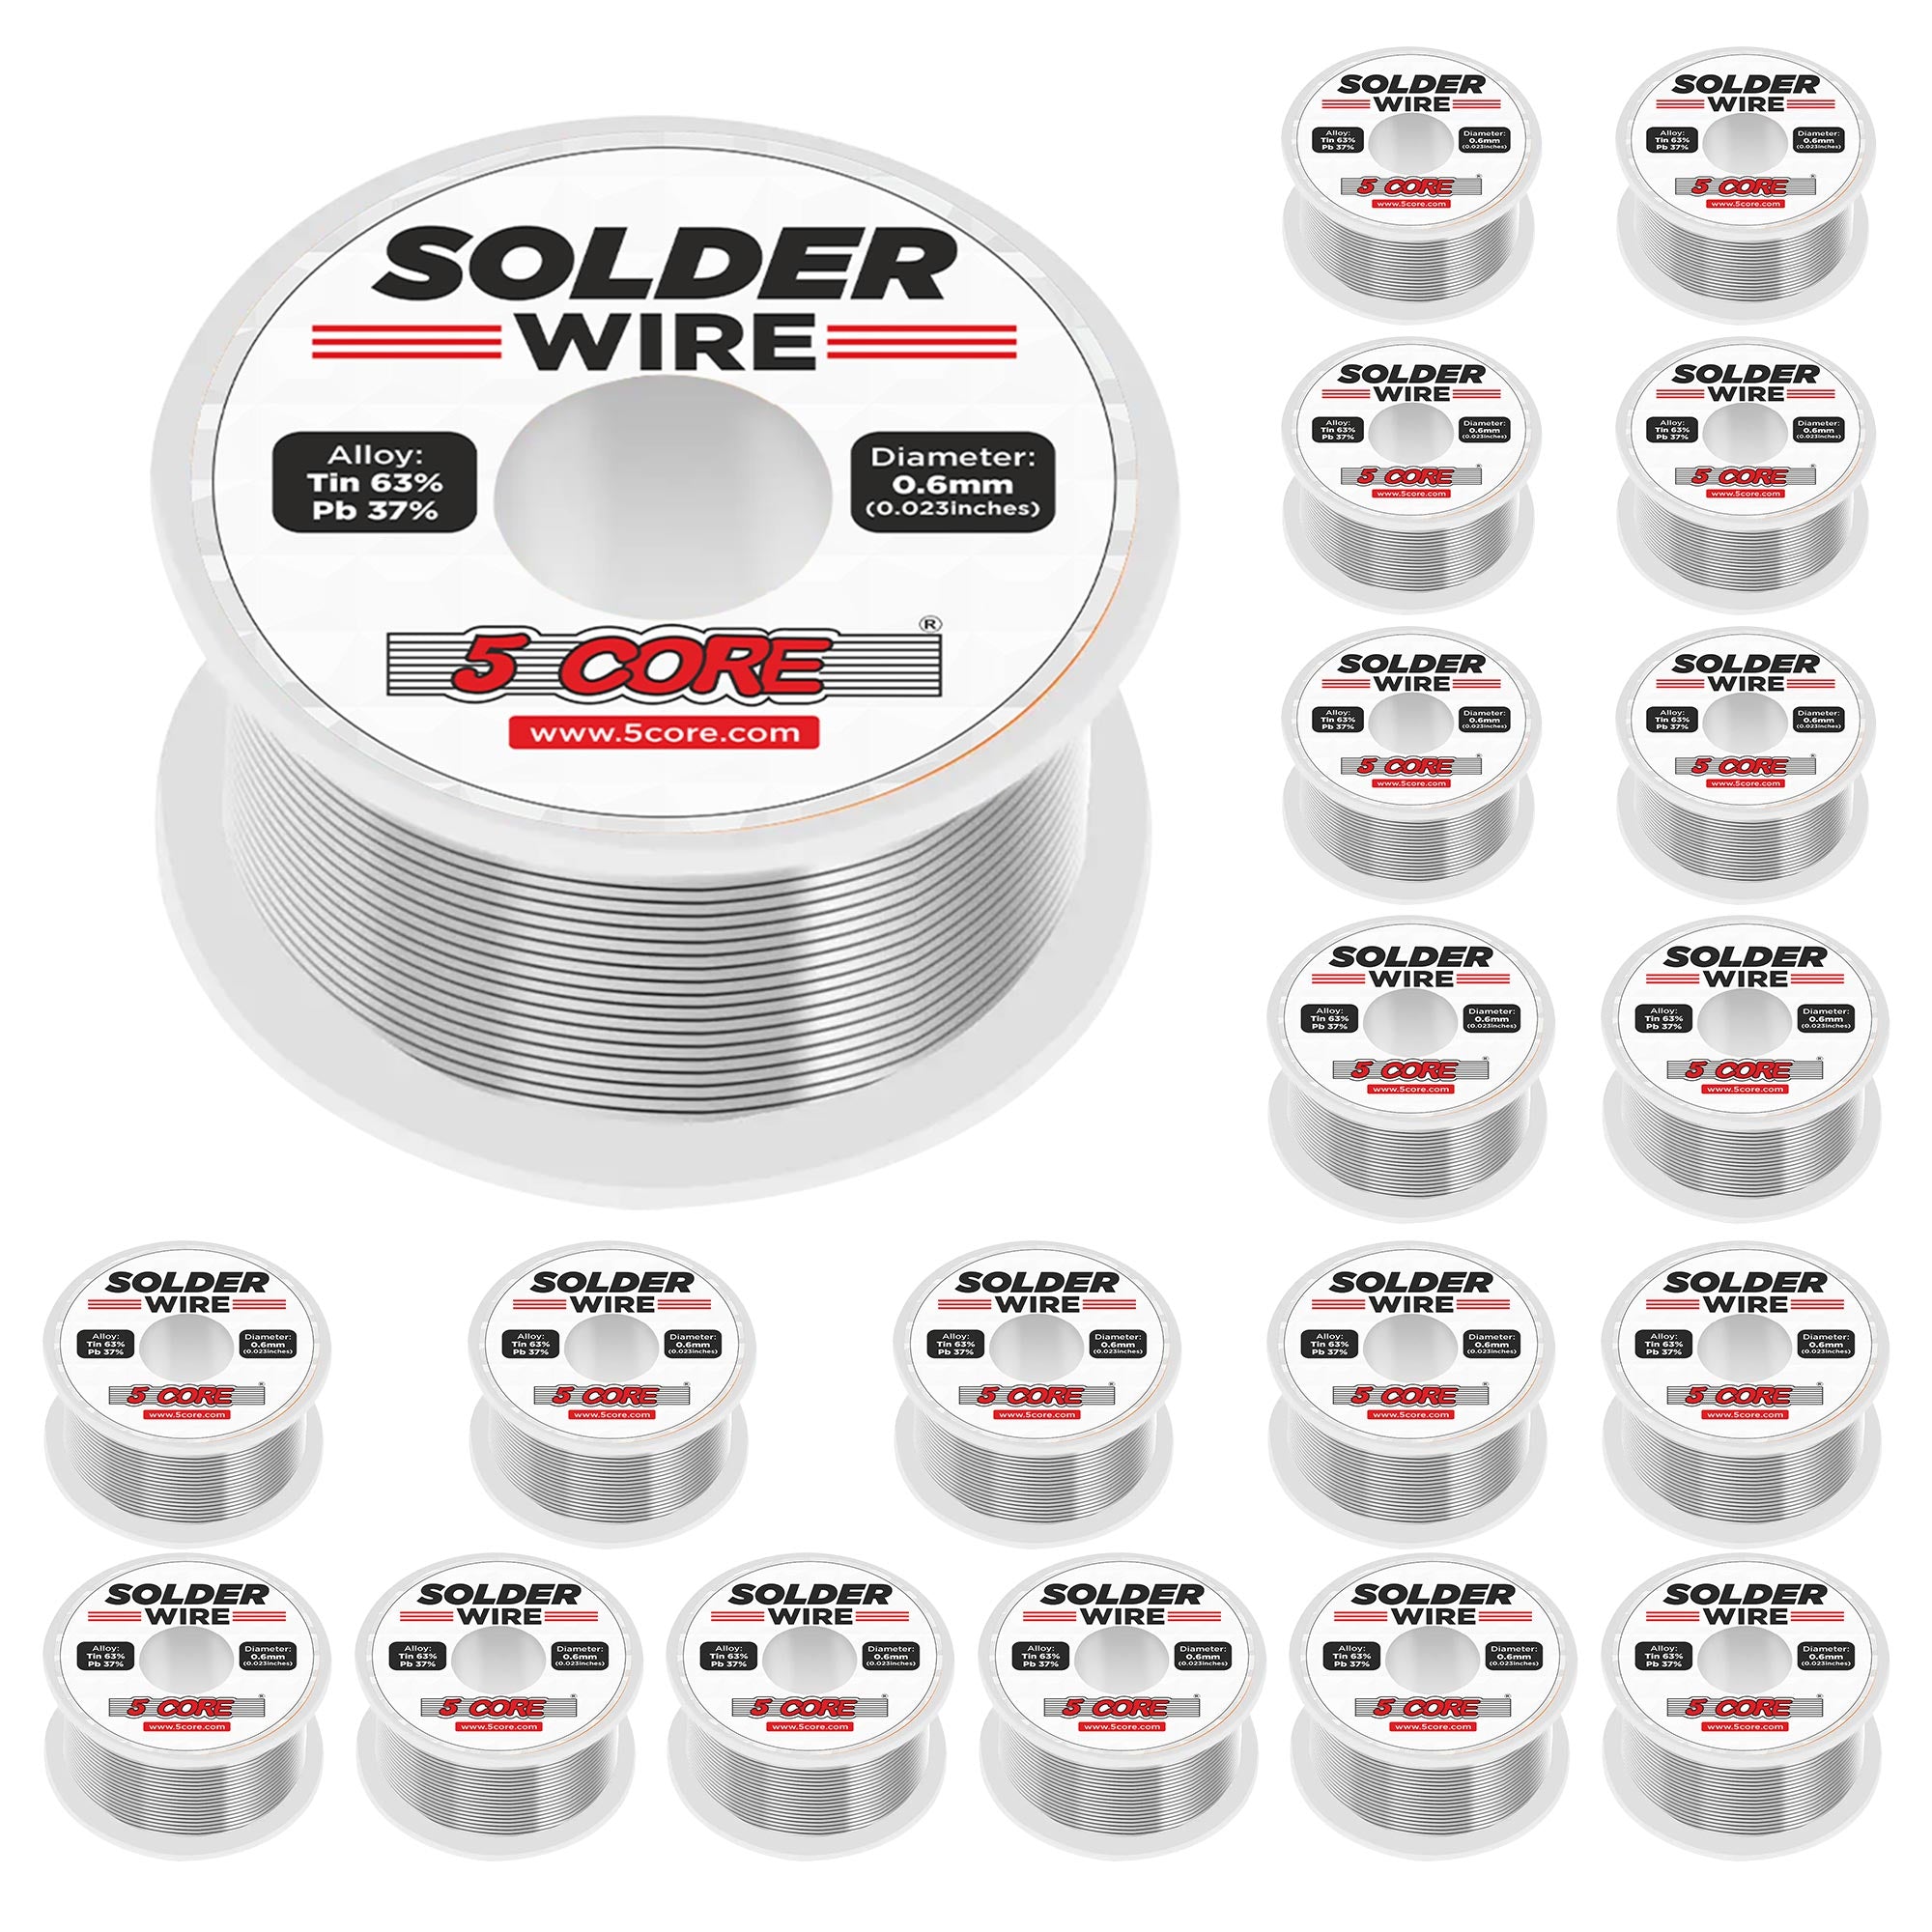 5Core Solder Wire 5 Pack  DIY Tin Lead for Soldering Components- solder wire 5 pcs